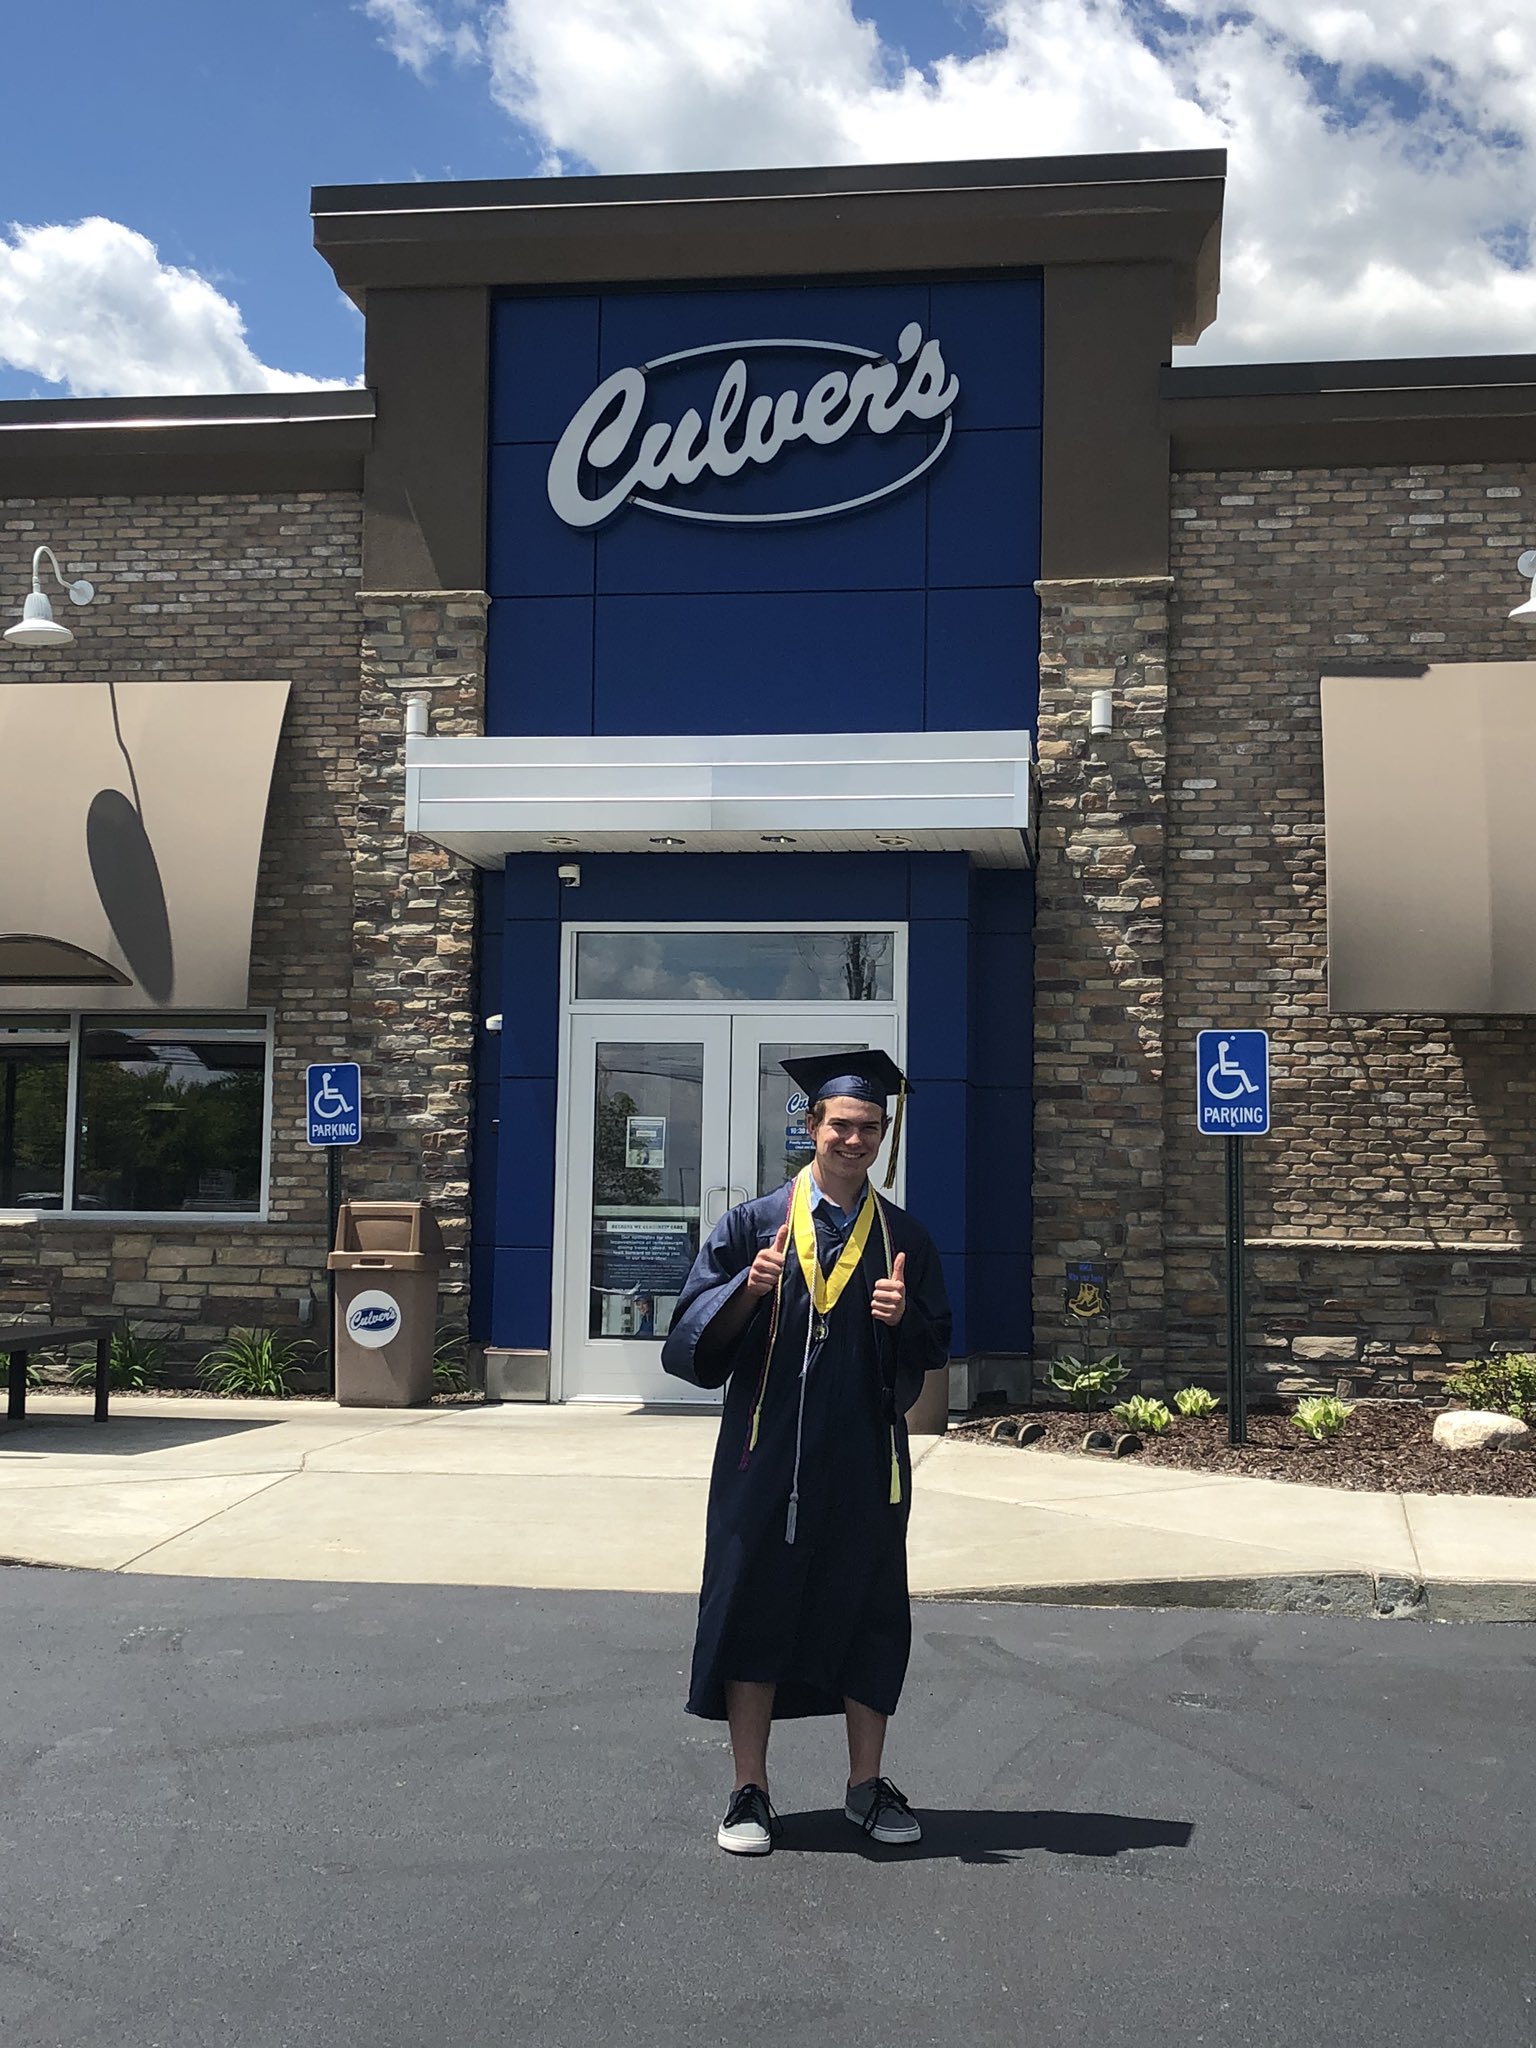 Man wearing graduation gown, standing in front of a Culver's restaurant